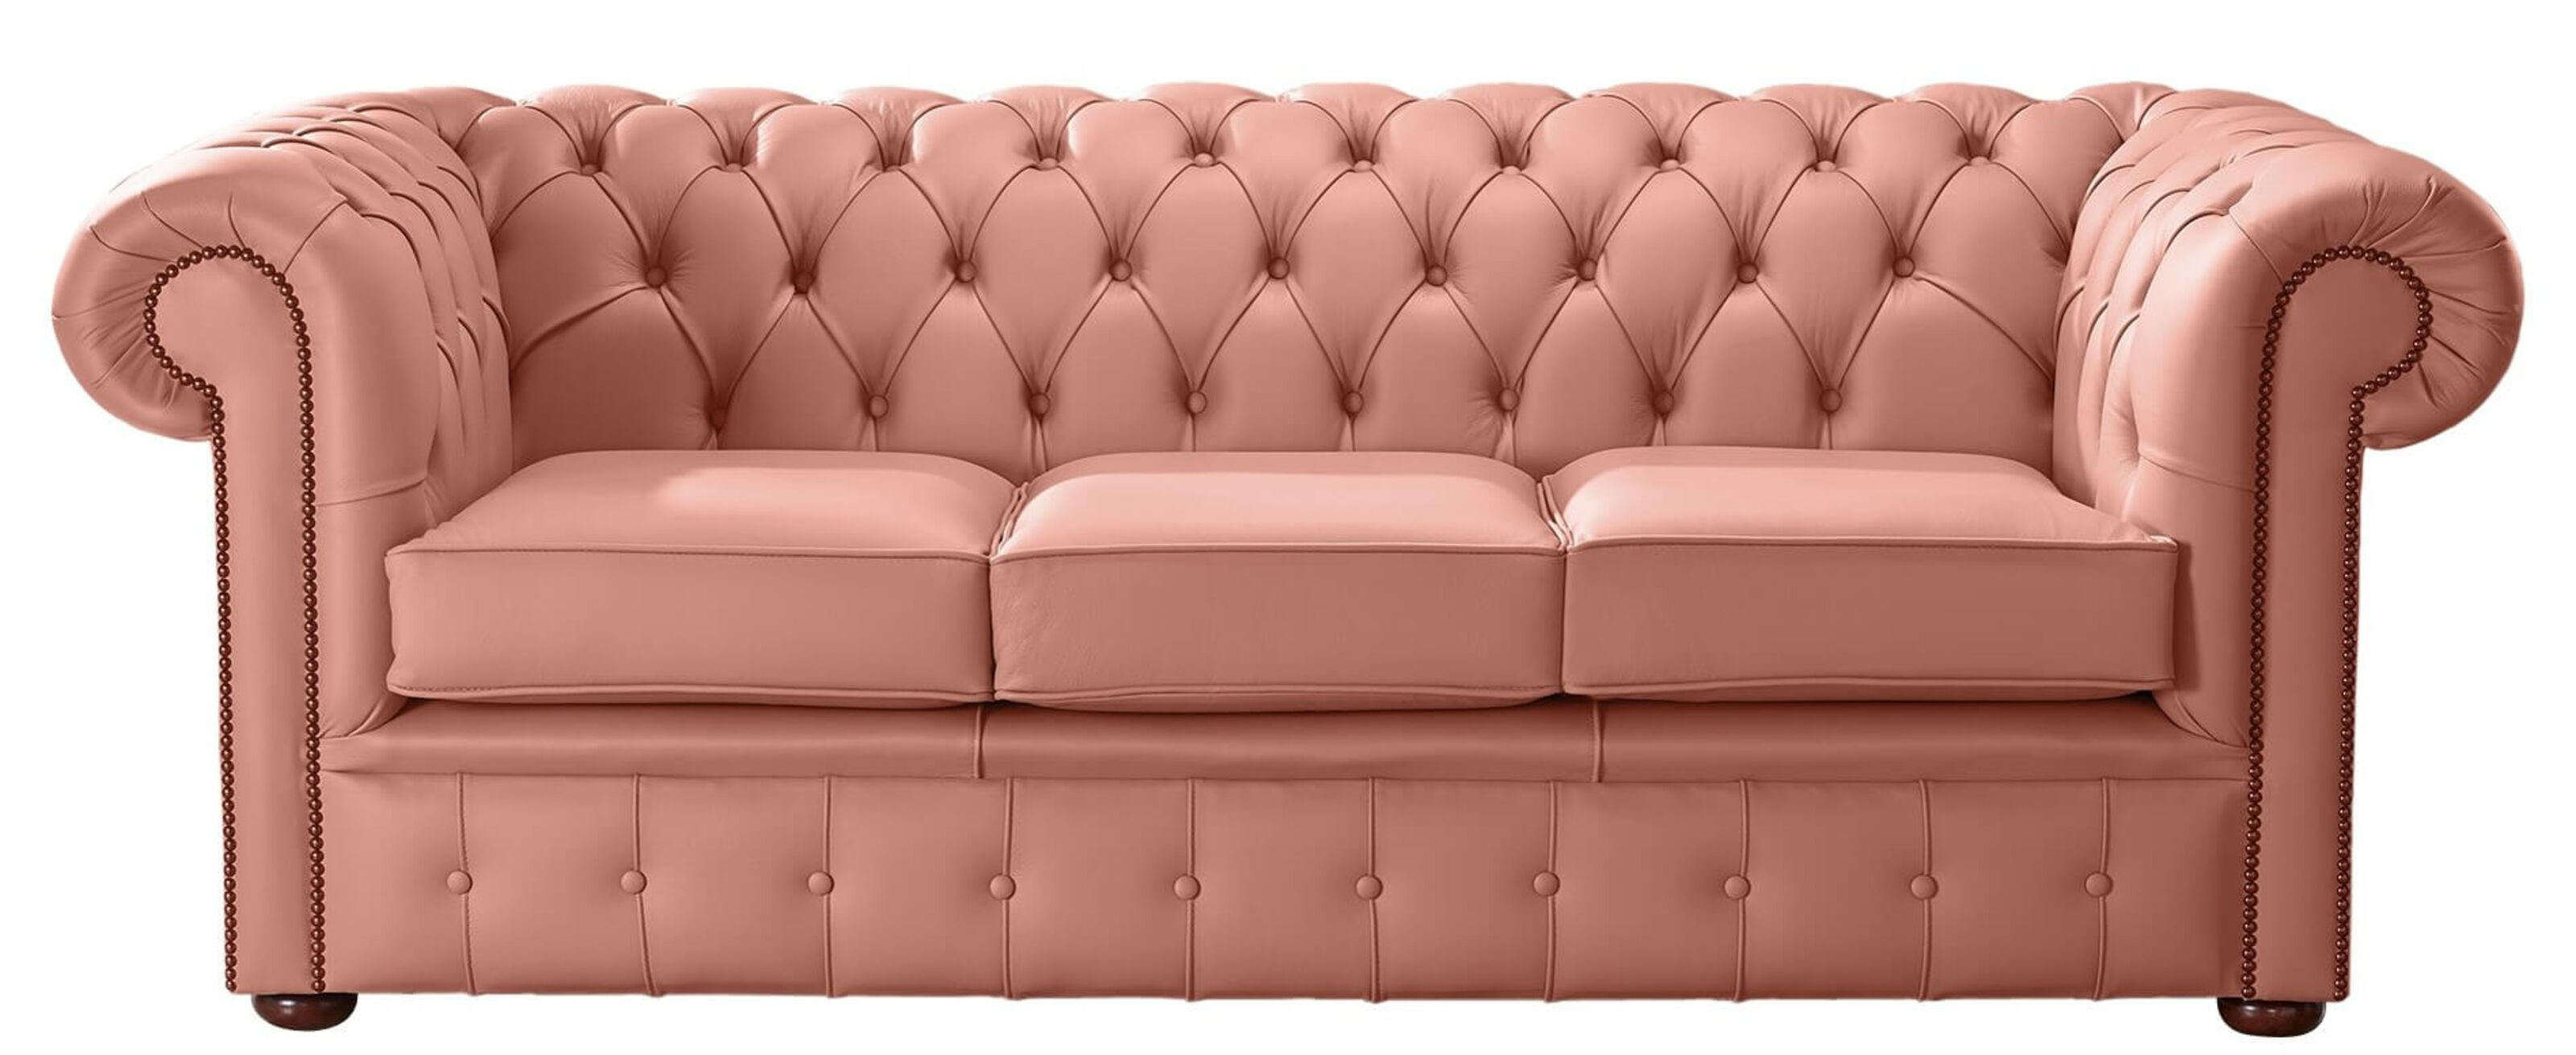 Chesterfield Sofas: Making a Timeless Statement  %Post Title